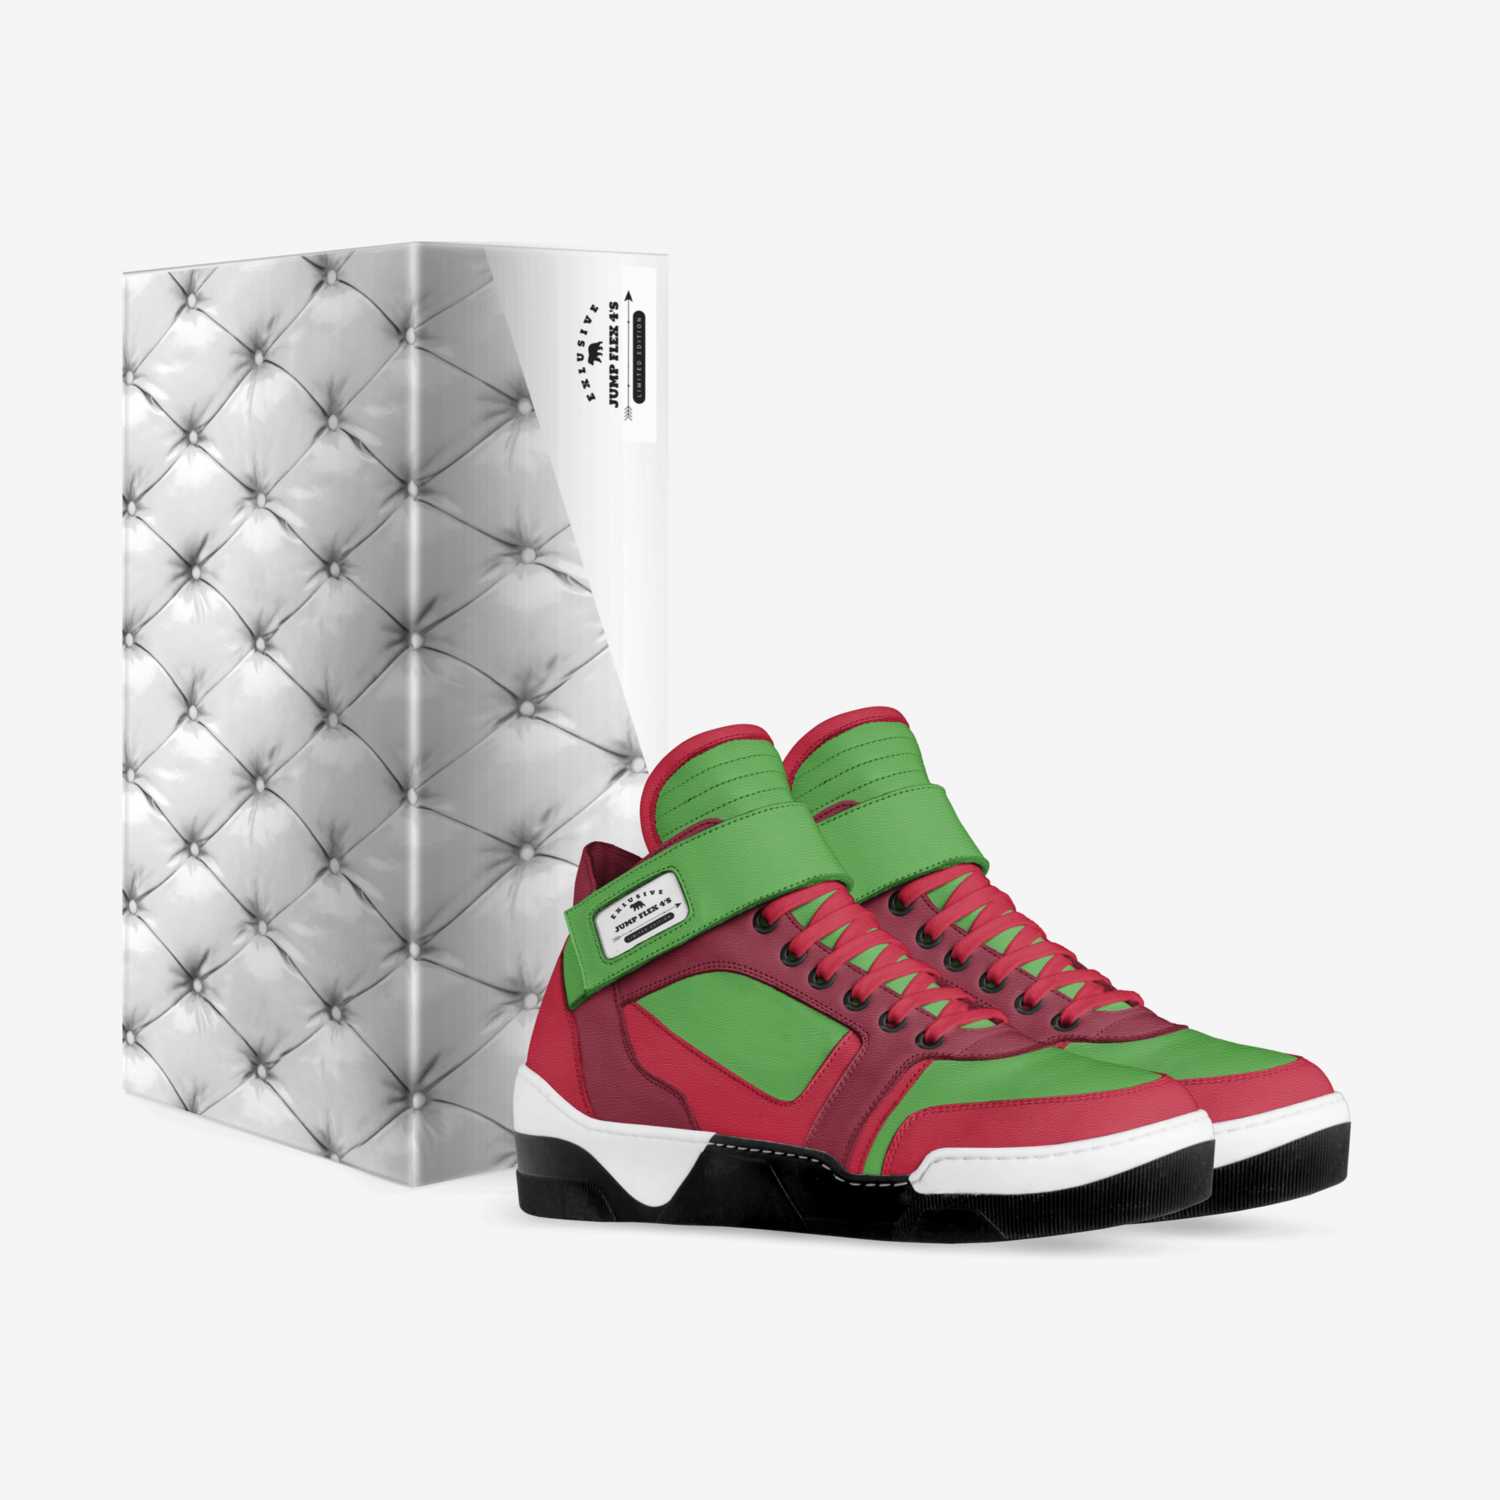 jump flex 4's custom made in Italy shoes by Camrie Williams | Box view